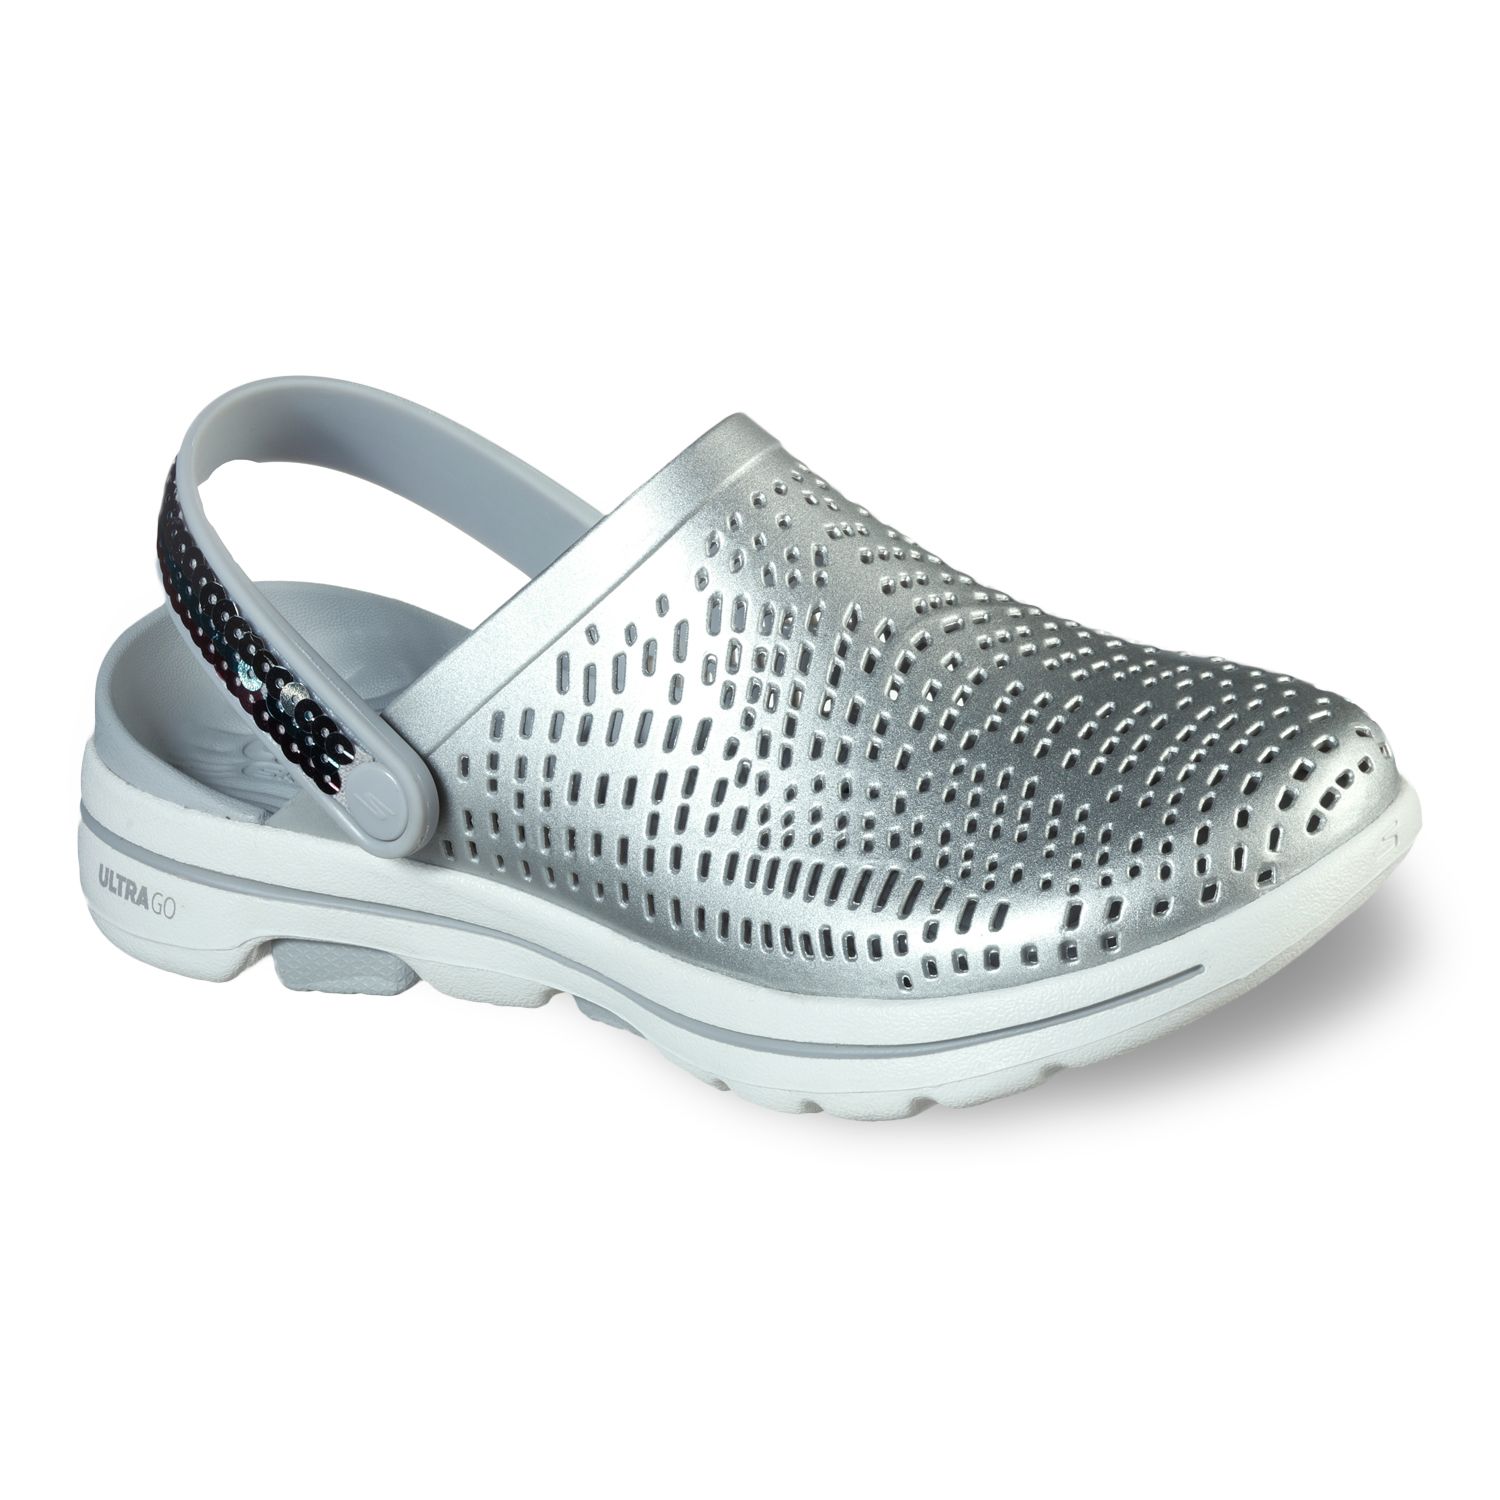 Skechers Walk Clogs Clearance, SAVE 57%.